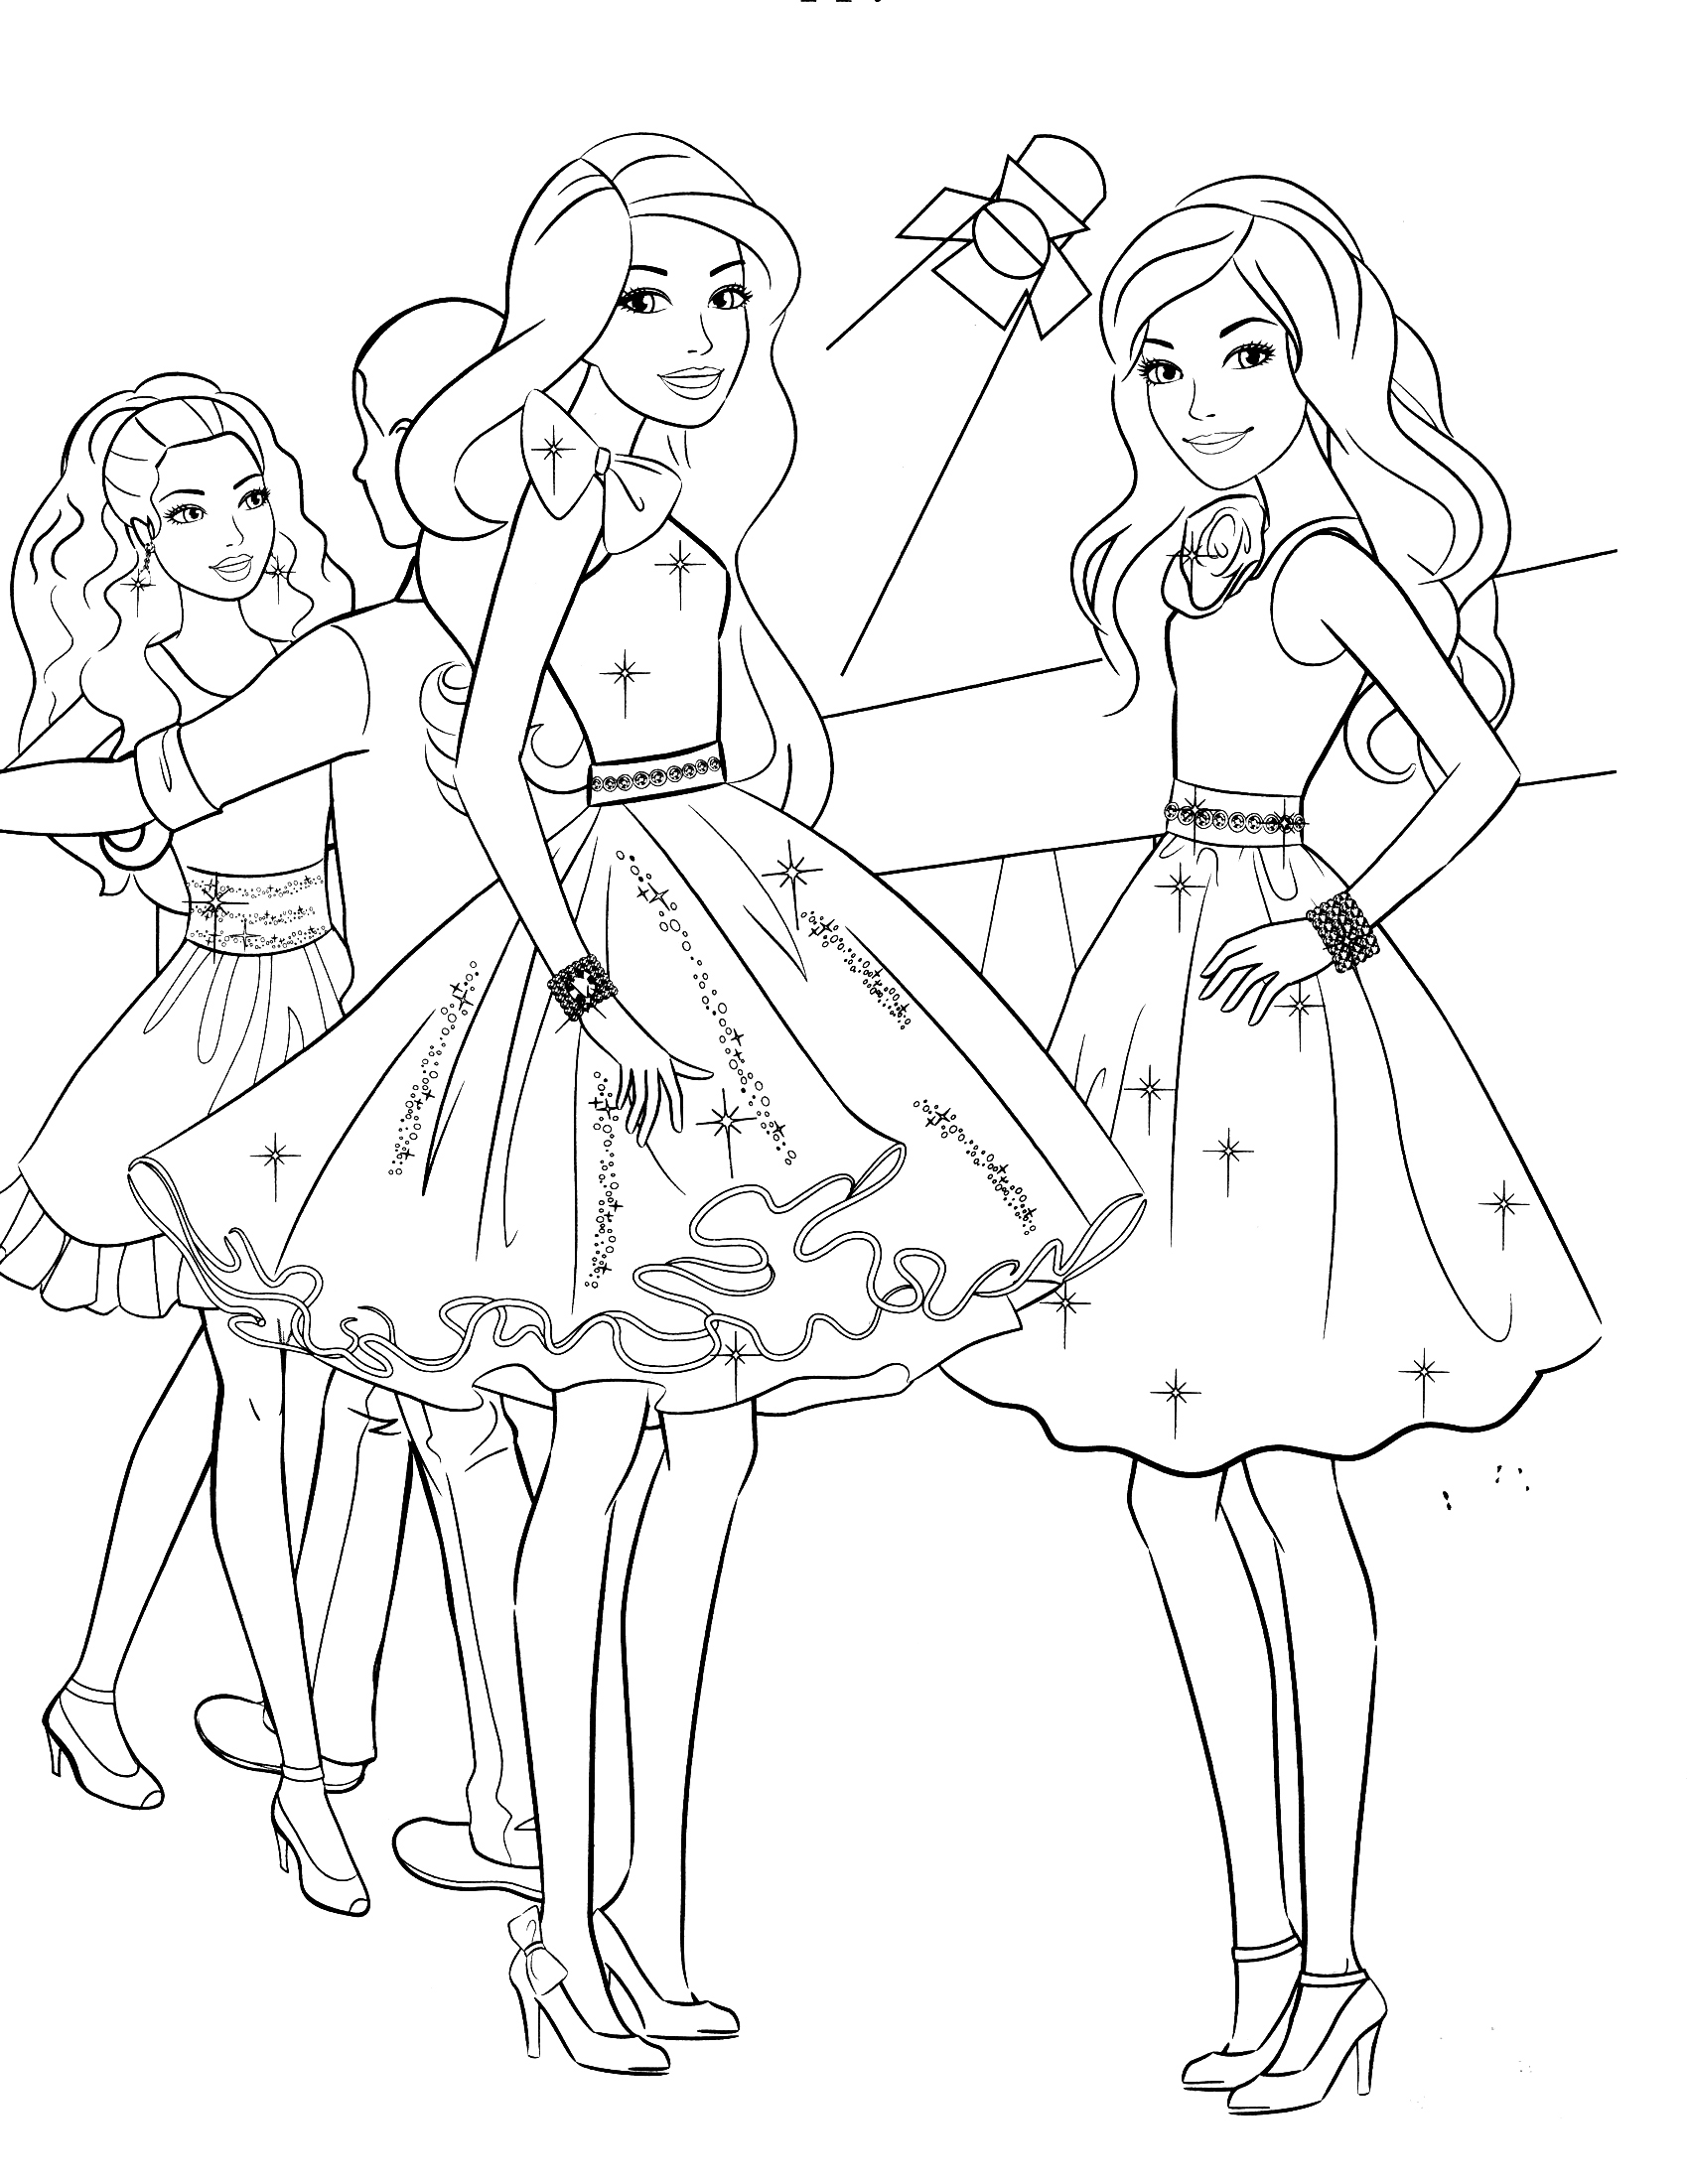 Barbie coloring page with barbie friends